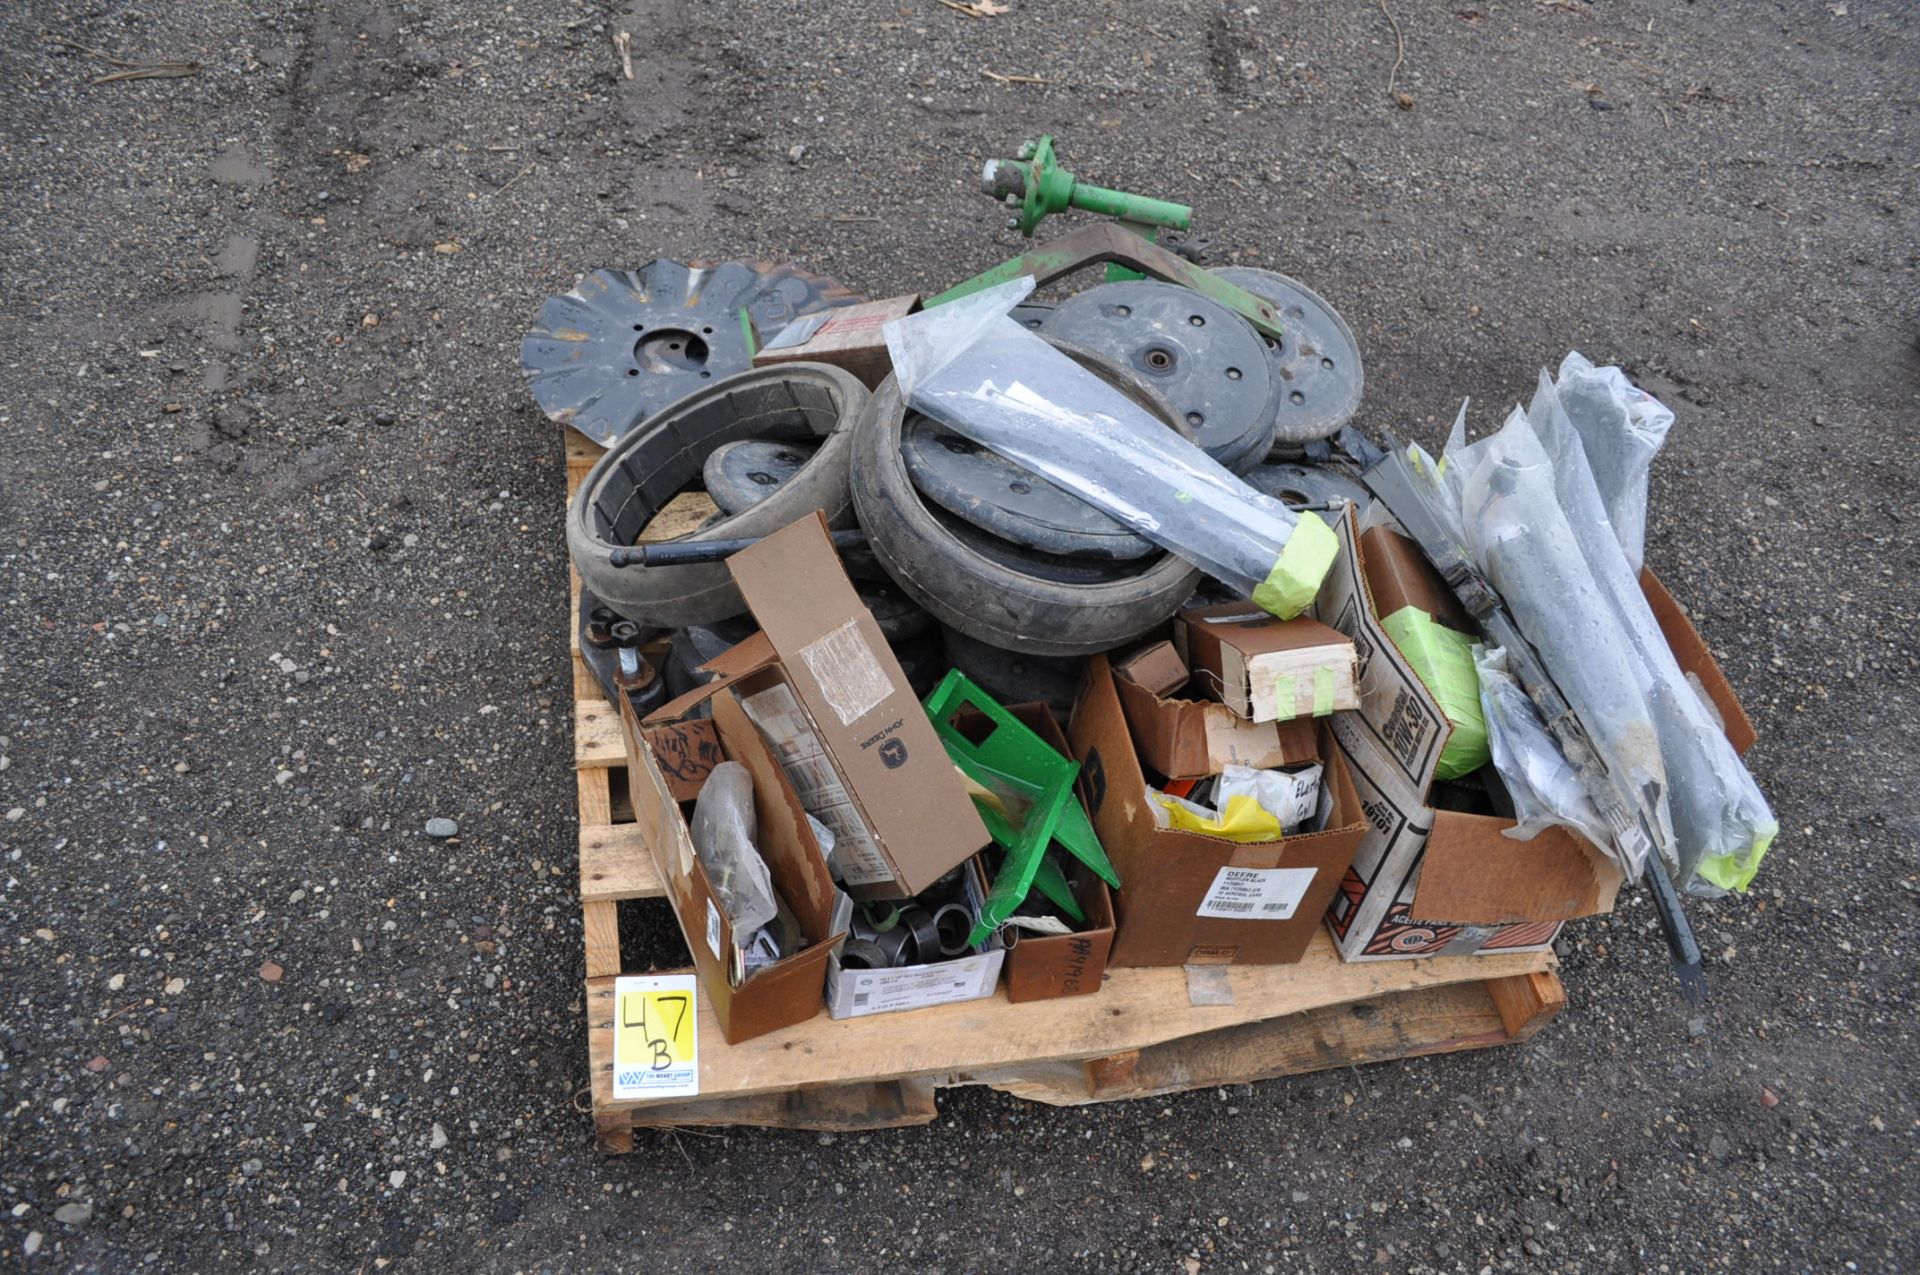 Spare John Deere planter parts, seed tubes with sensors, rubber press wheels, no till coulters